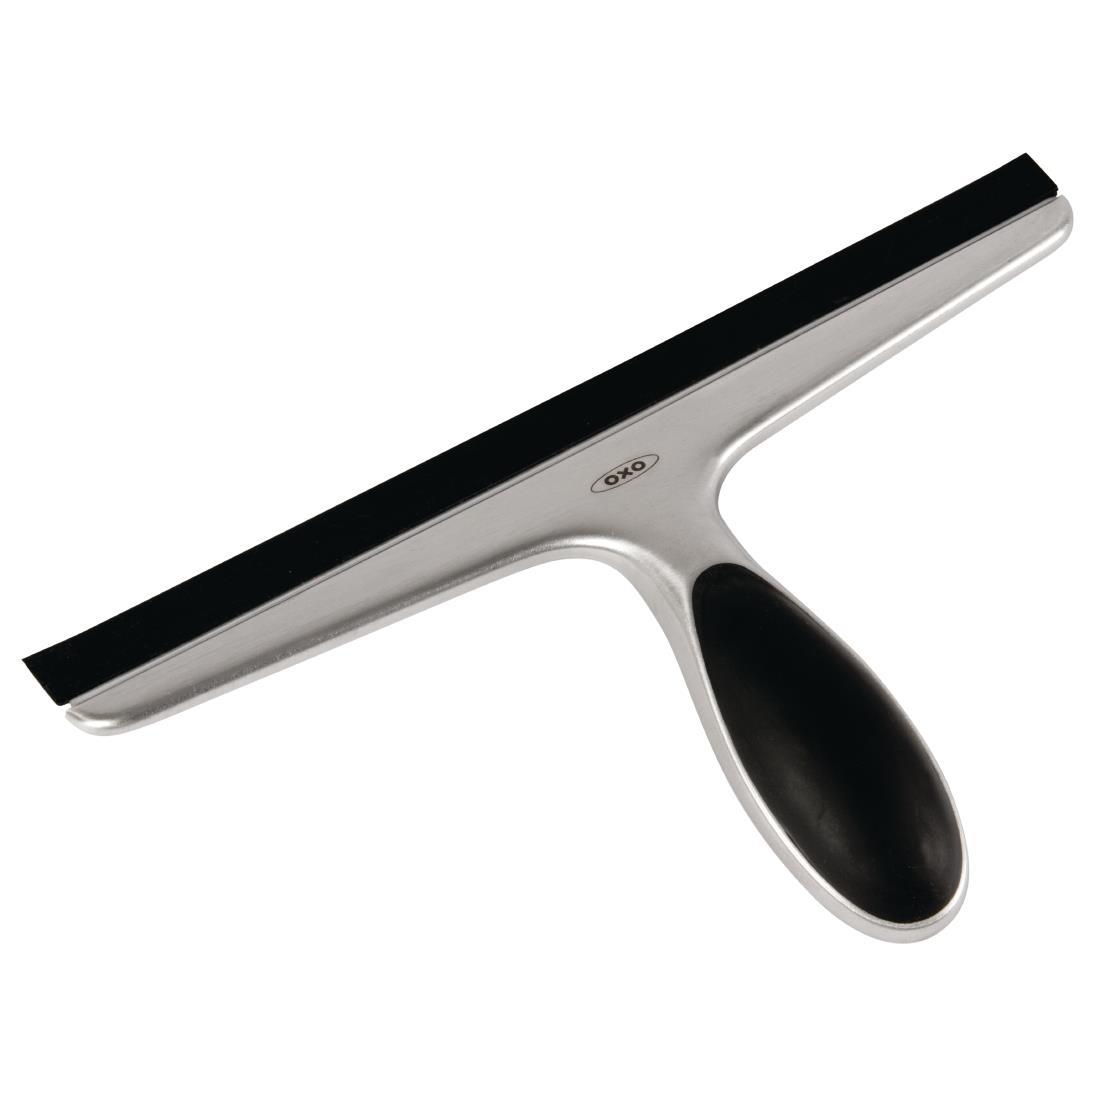 Oxo Good Grips Stainless Steel Squeegee - GG067  - 2